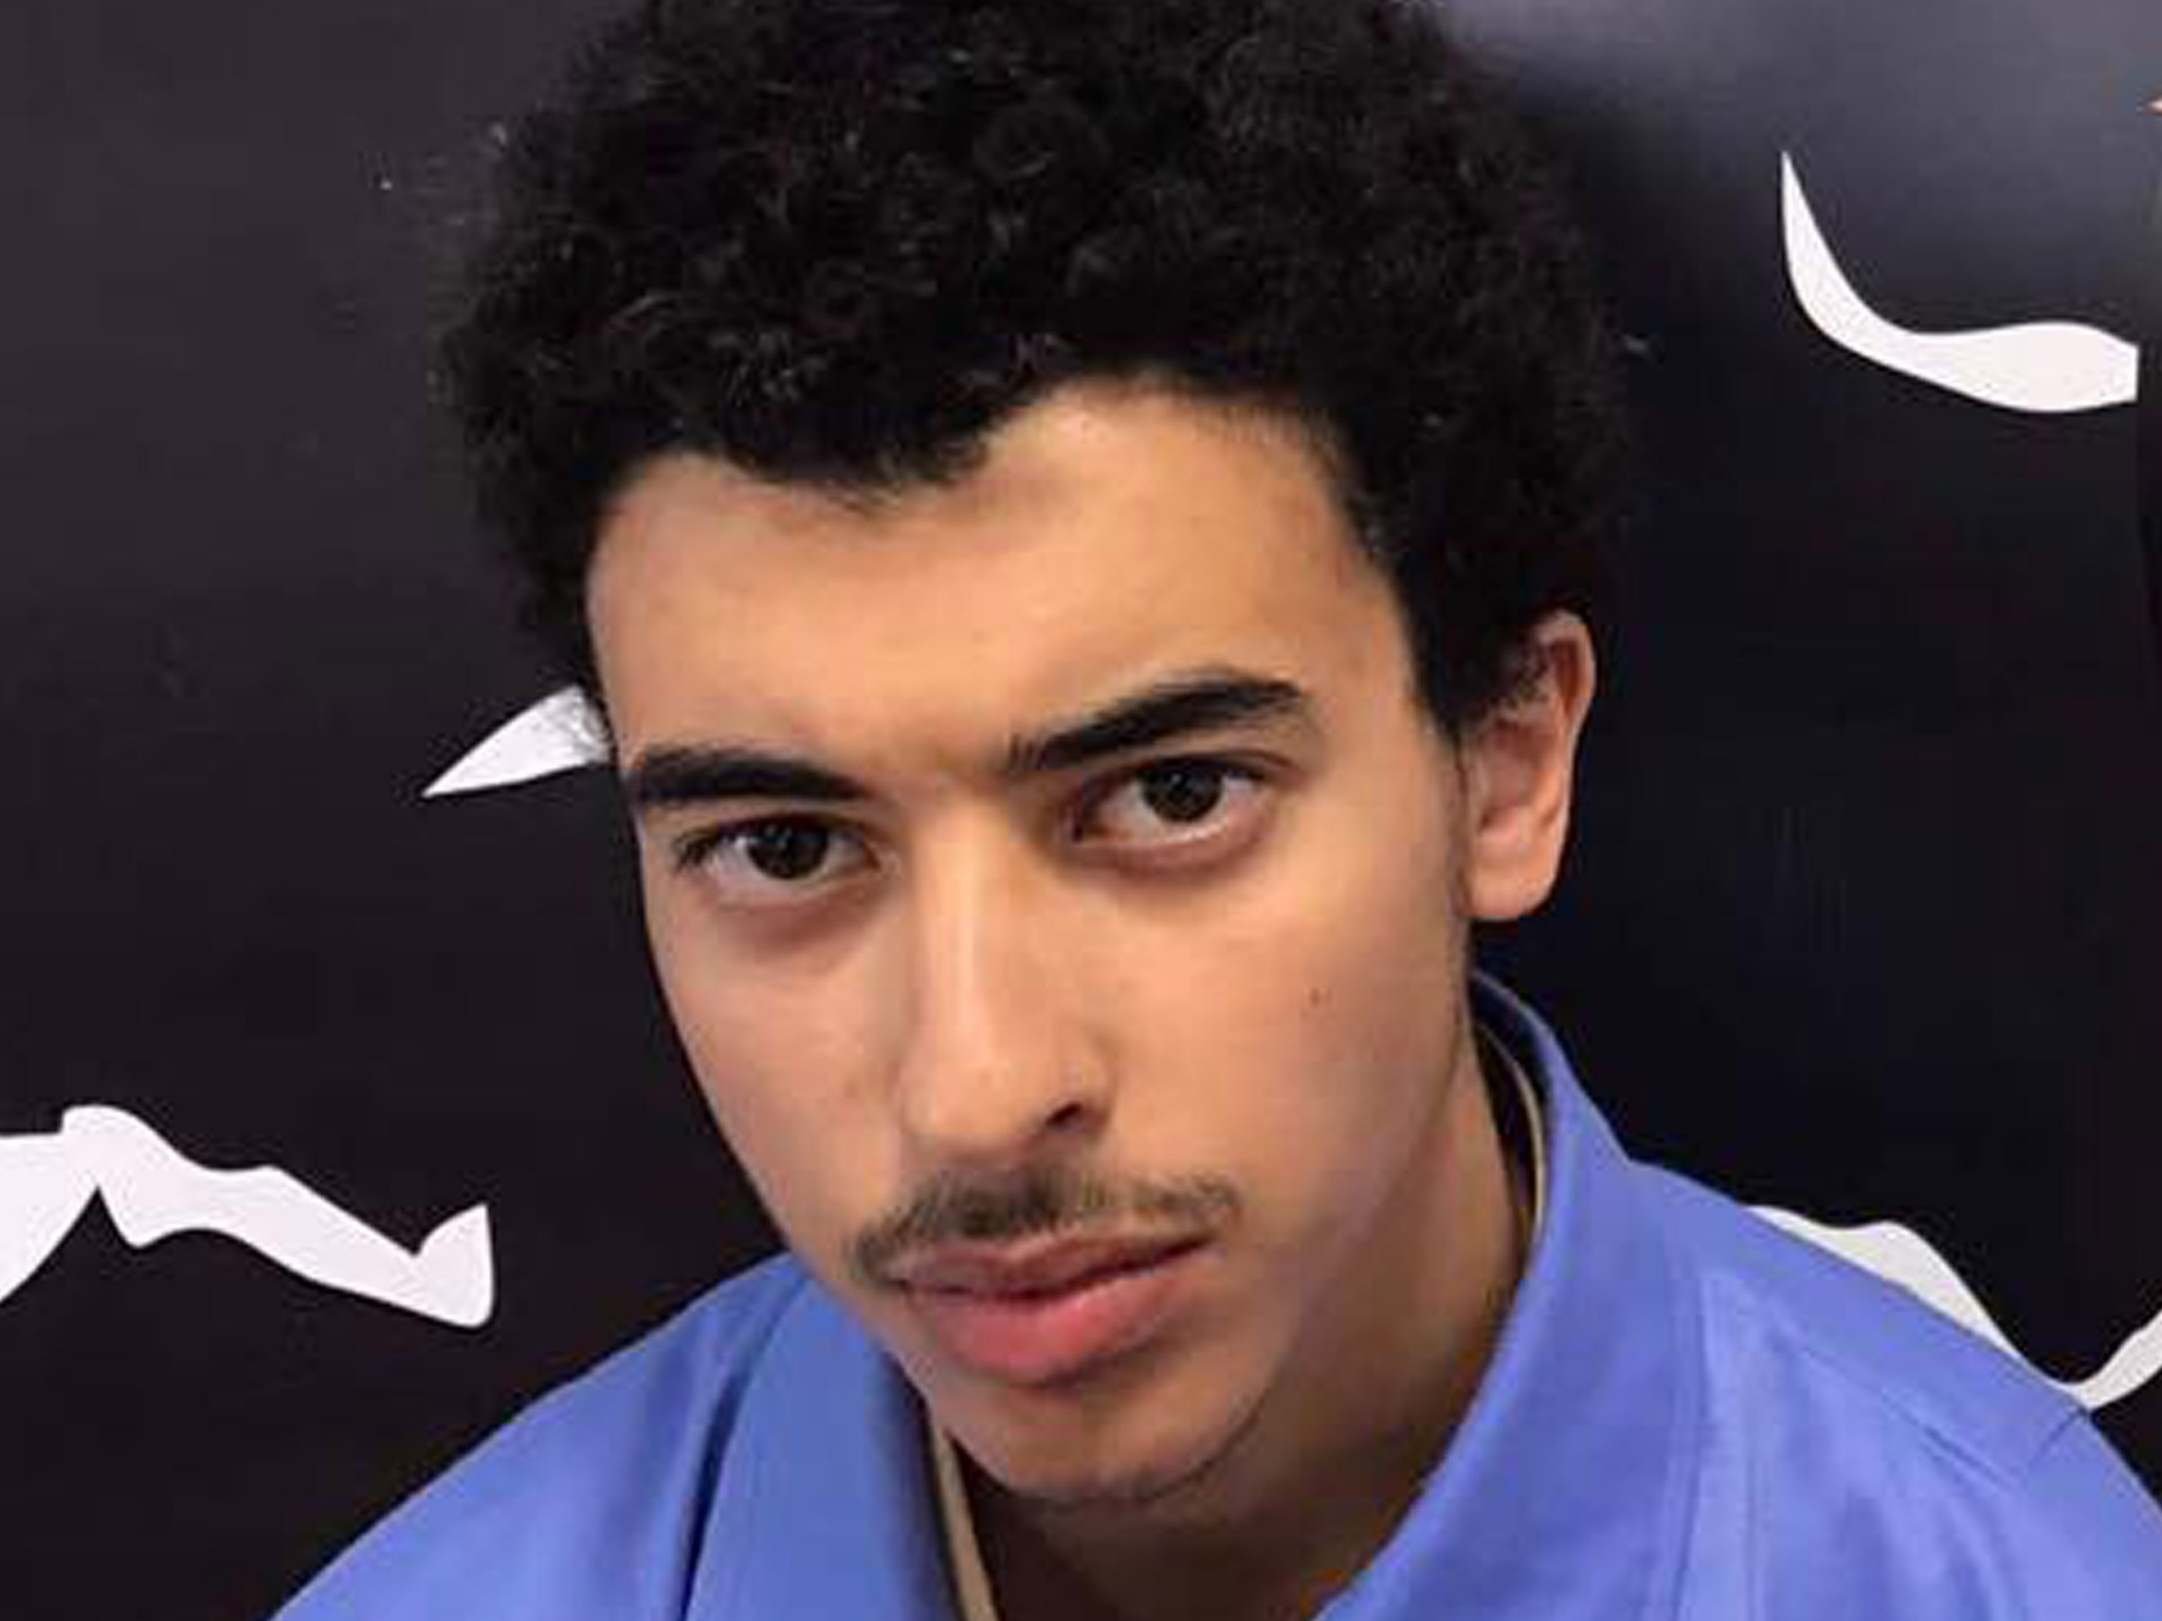 Hashem Abedi will go on trial in January 2020 and faces multiple charges of murder and attempted murder over the Manchester Arena attack